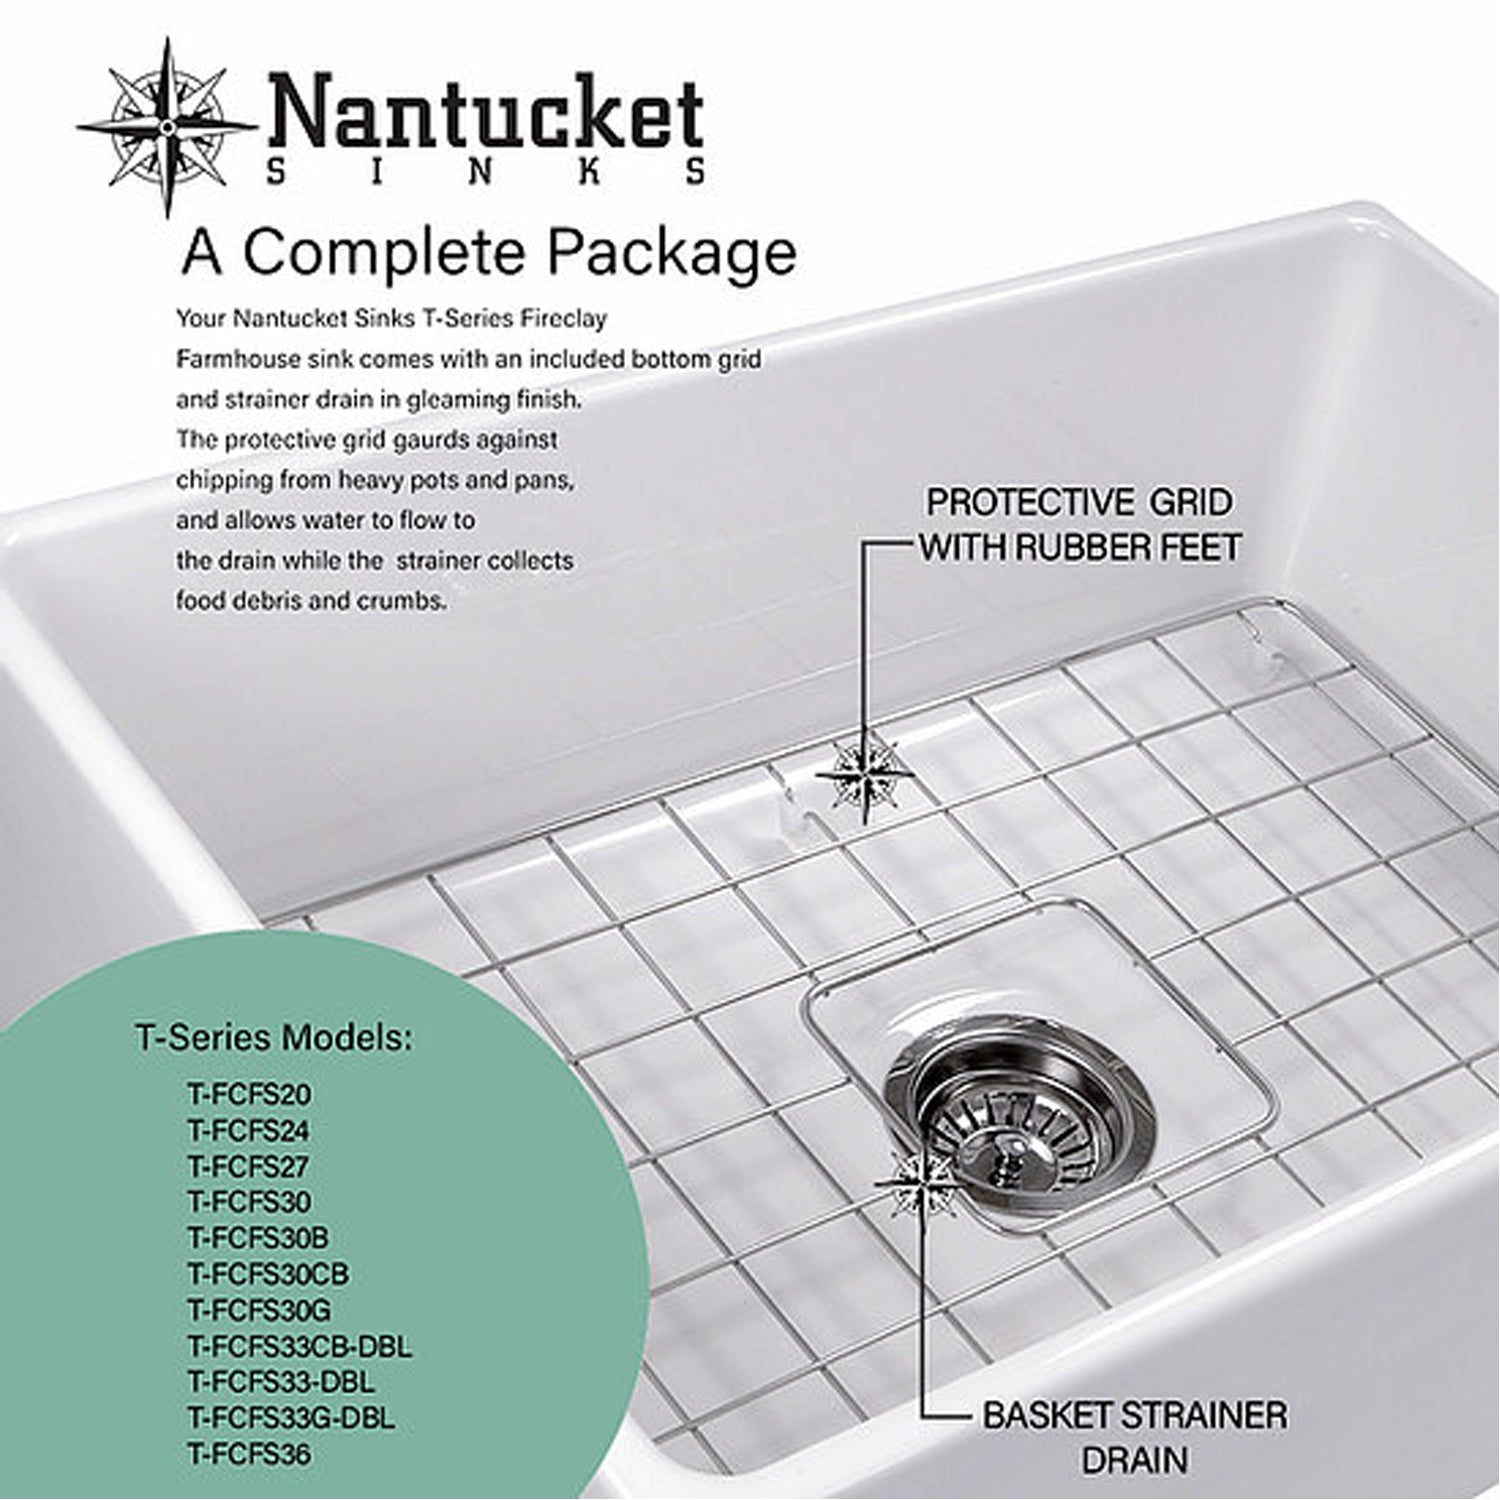 Nantucket Sinks 36" Double Bowl Farmhouse Fireclay Sink with Drains and Grids